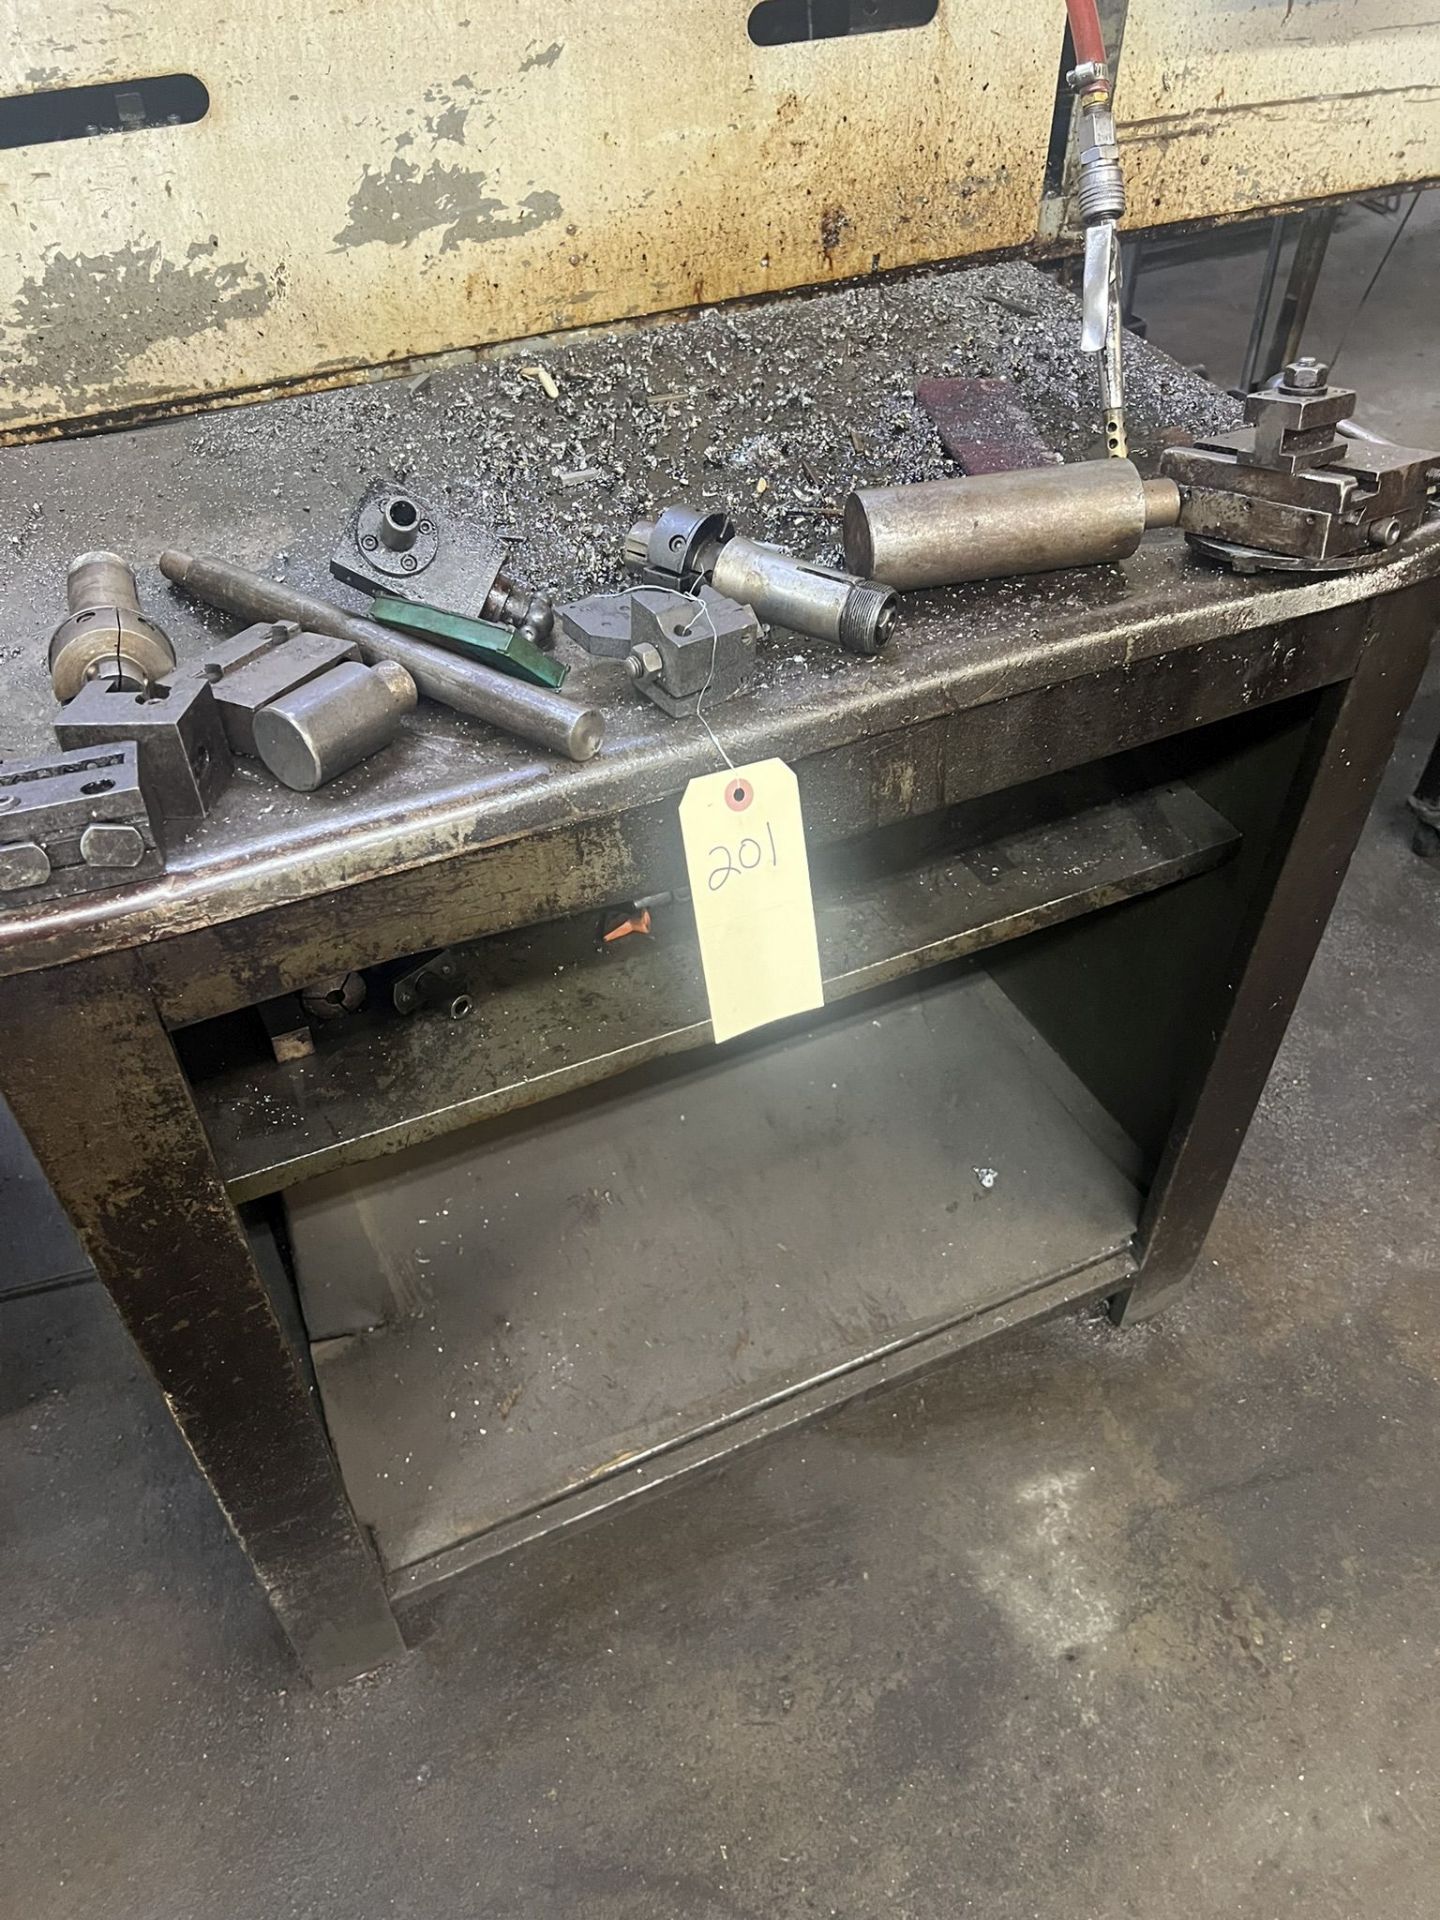 Metal Tool Stand and Contents, Vice, Tooling